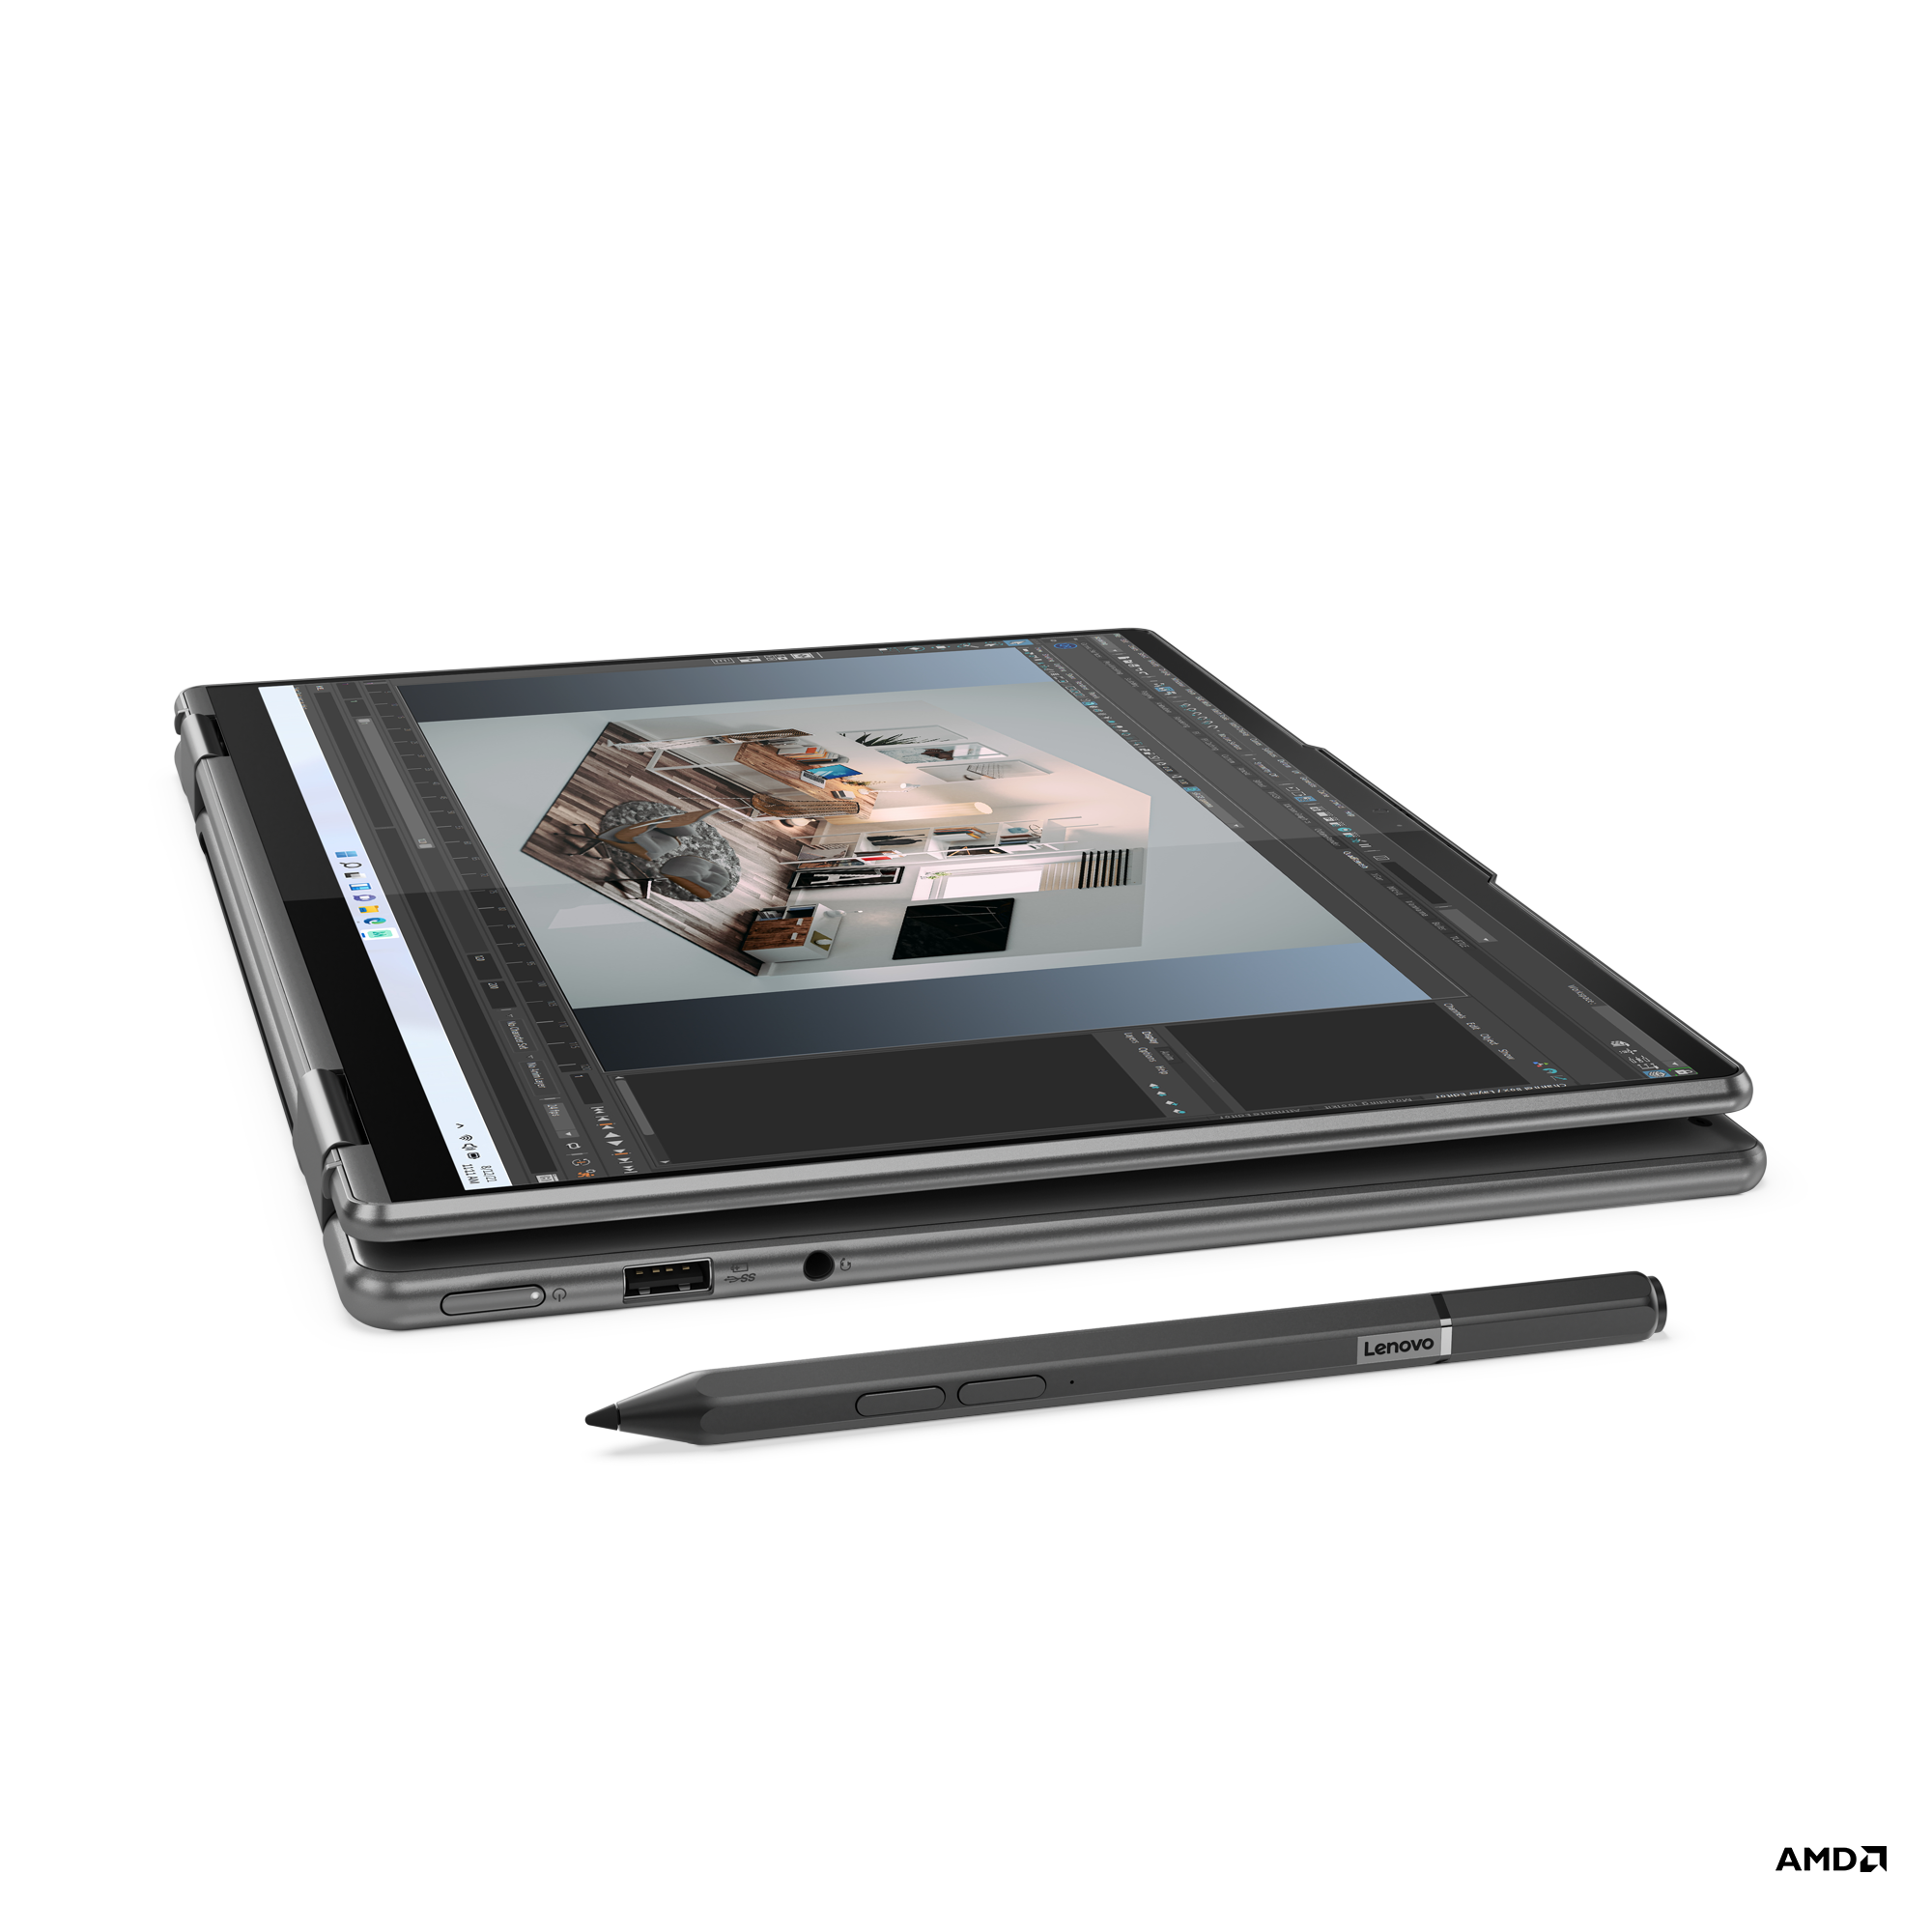 Lenovo Unveils New Yoga PCs So Customers Can Do More Their Way